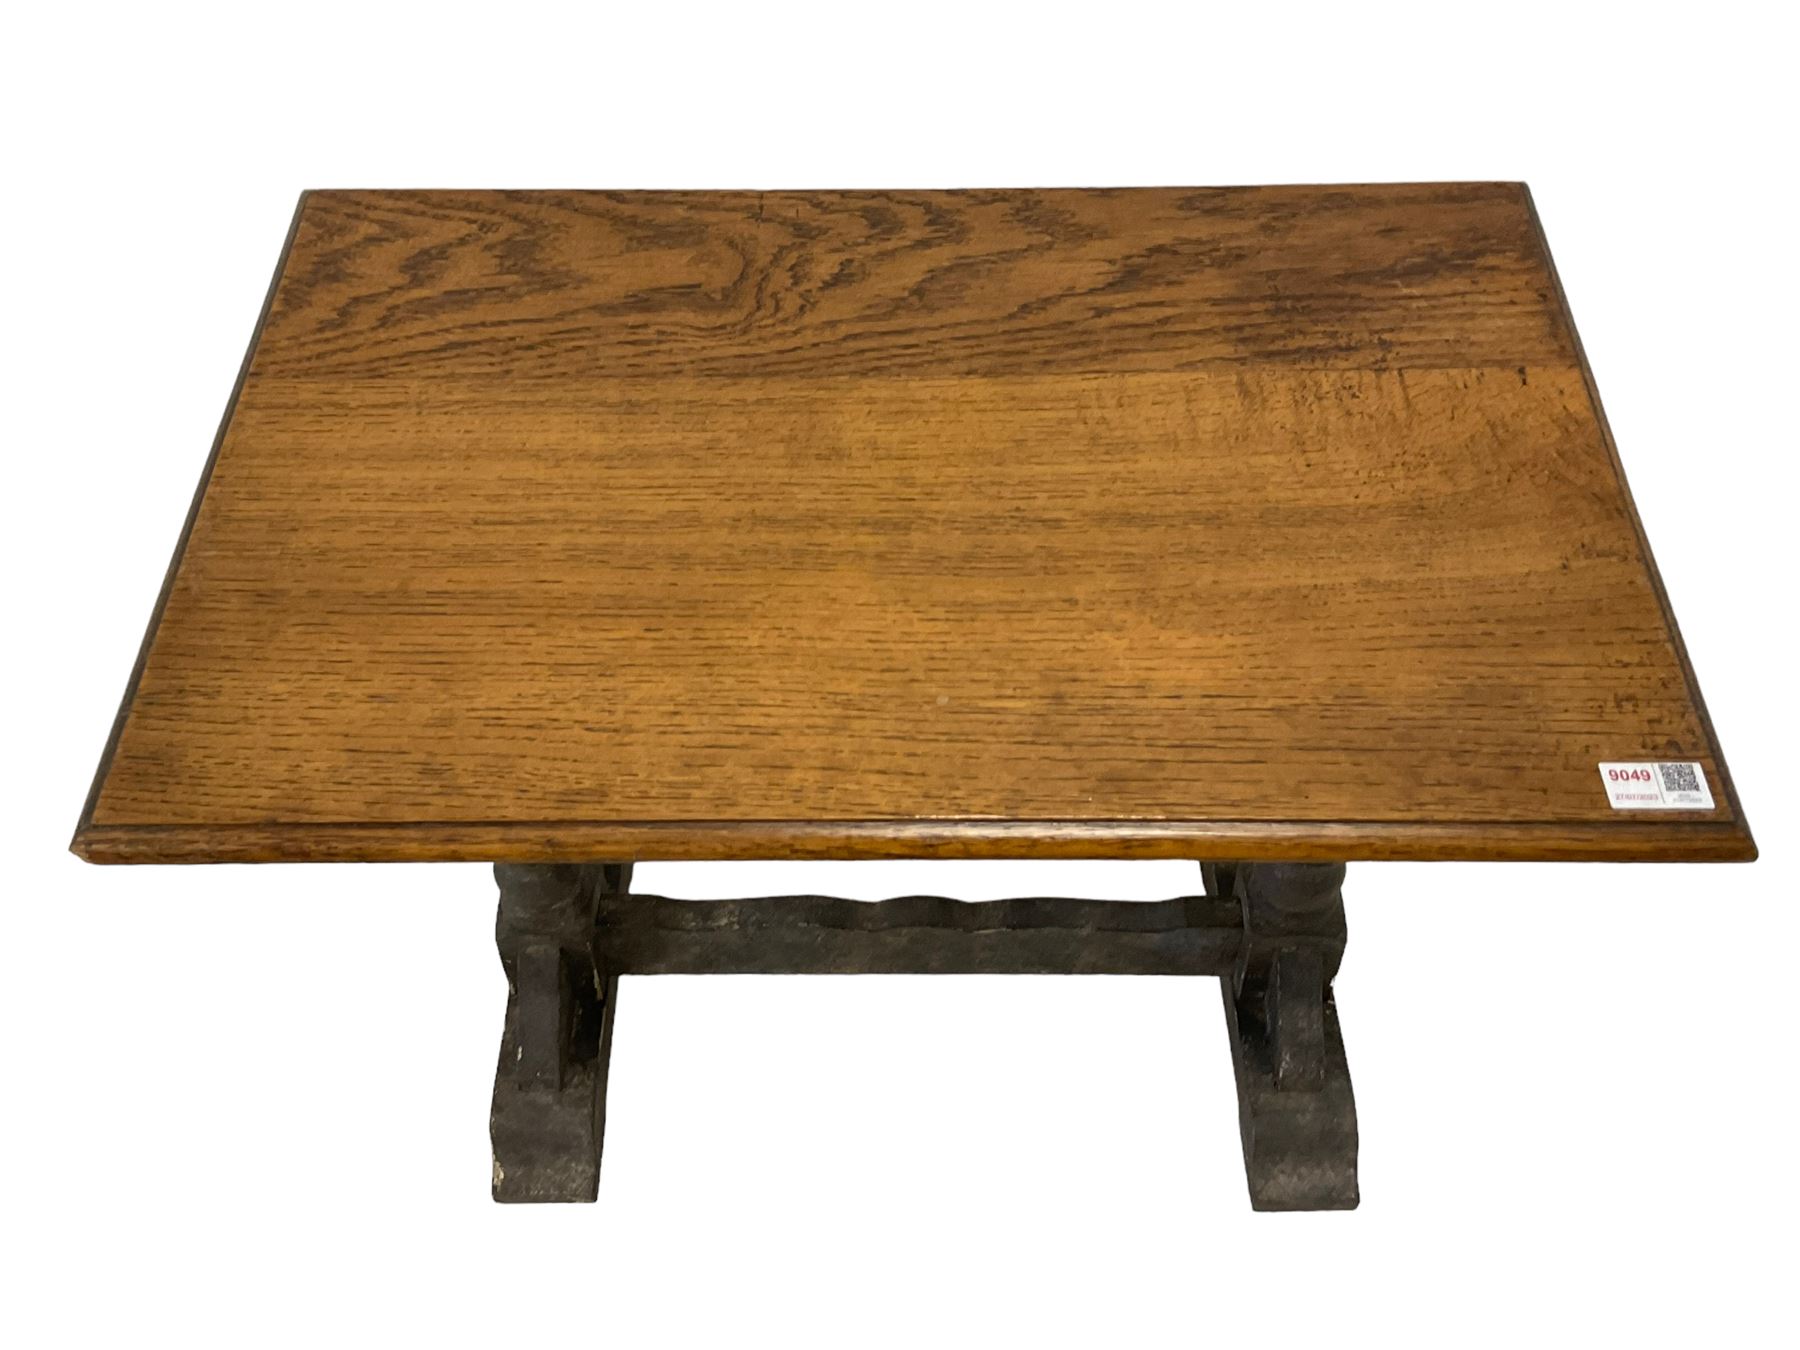 Small oak table - Image 3 of 3